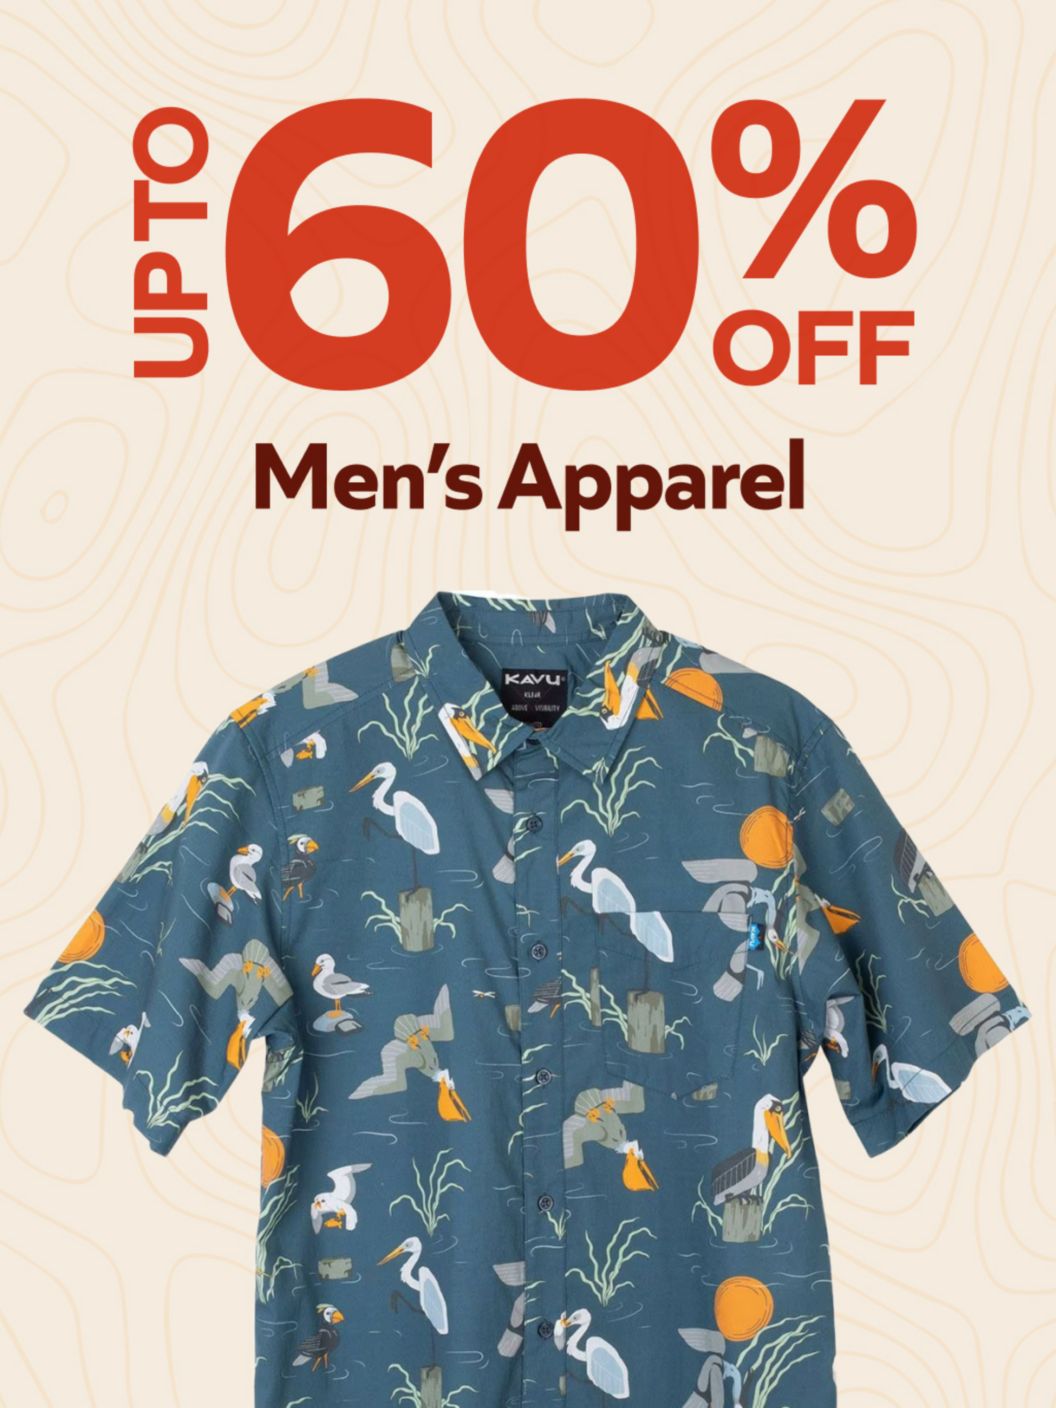 Men's Apparel  Up To 60% Off